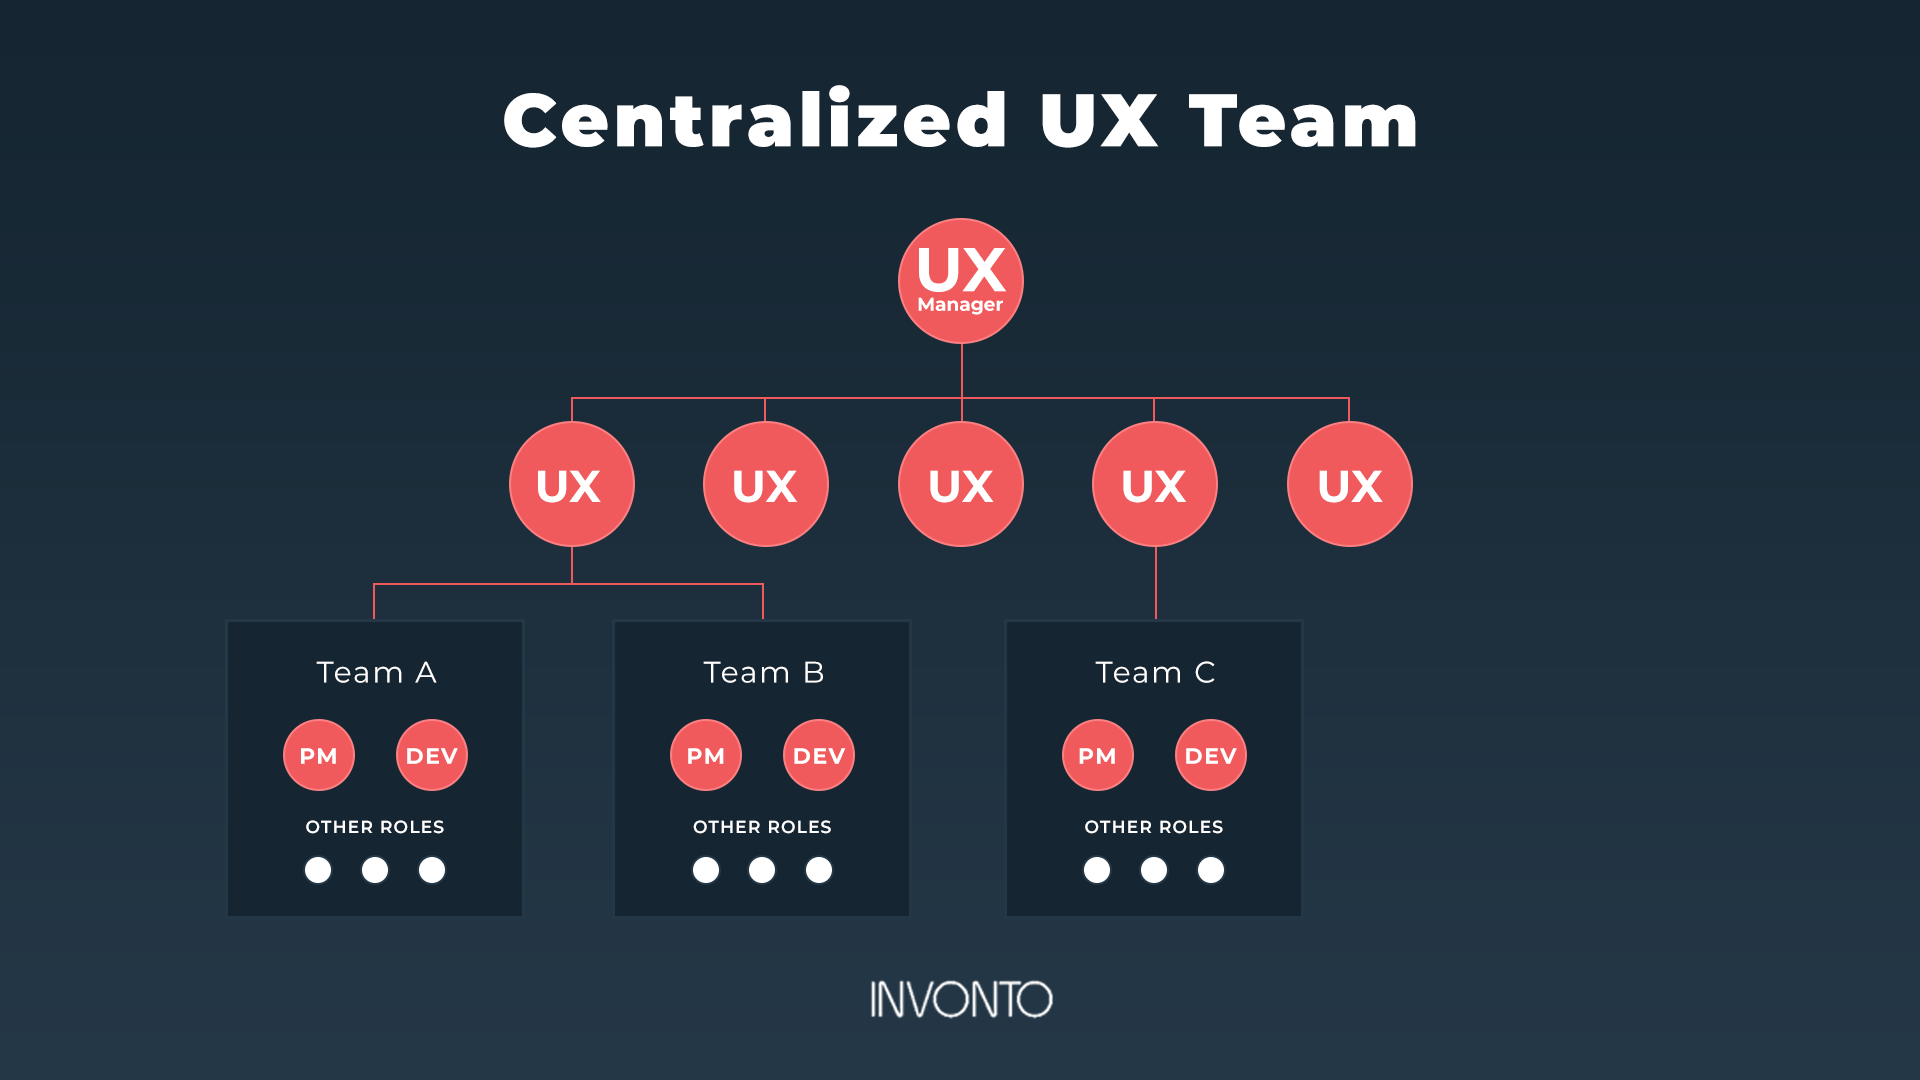 ux design process team structure example centralized ux team